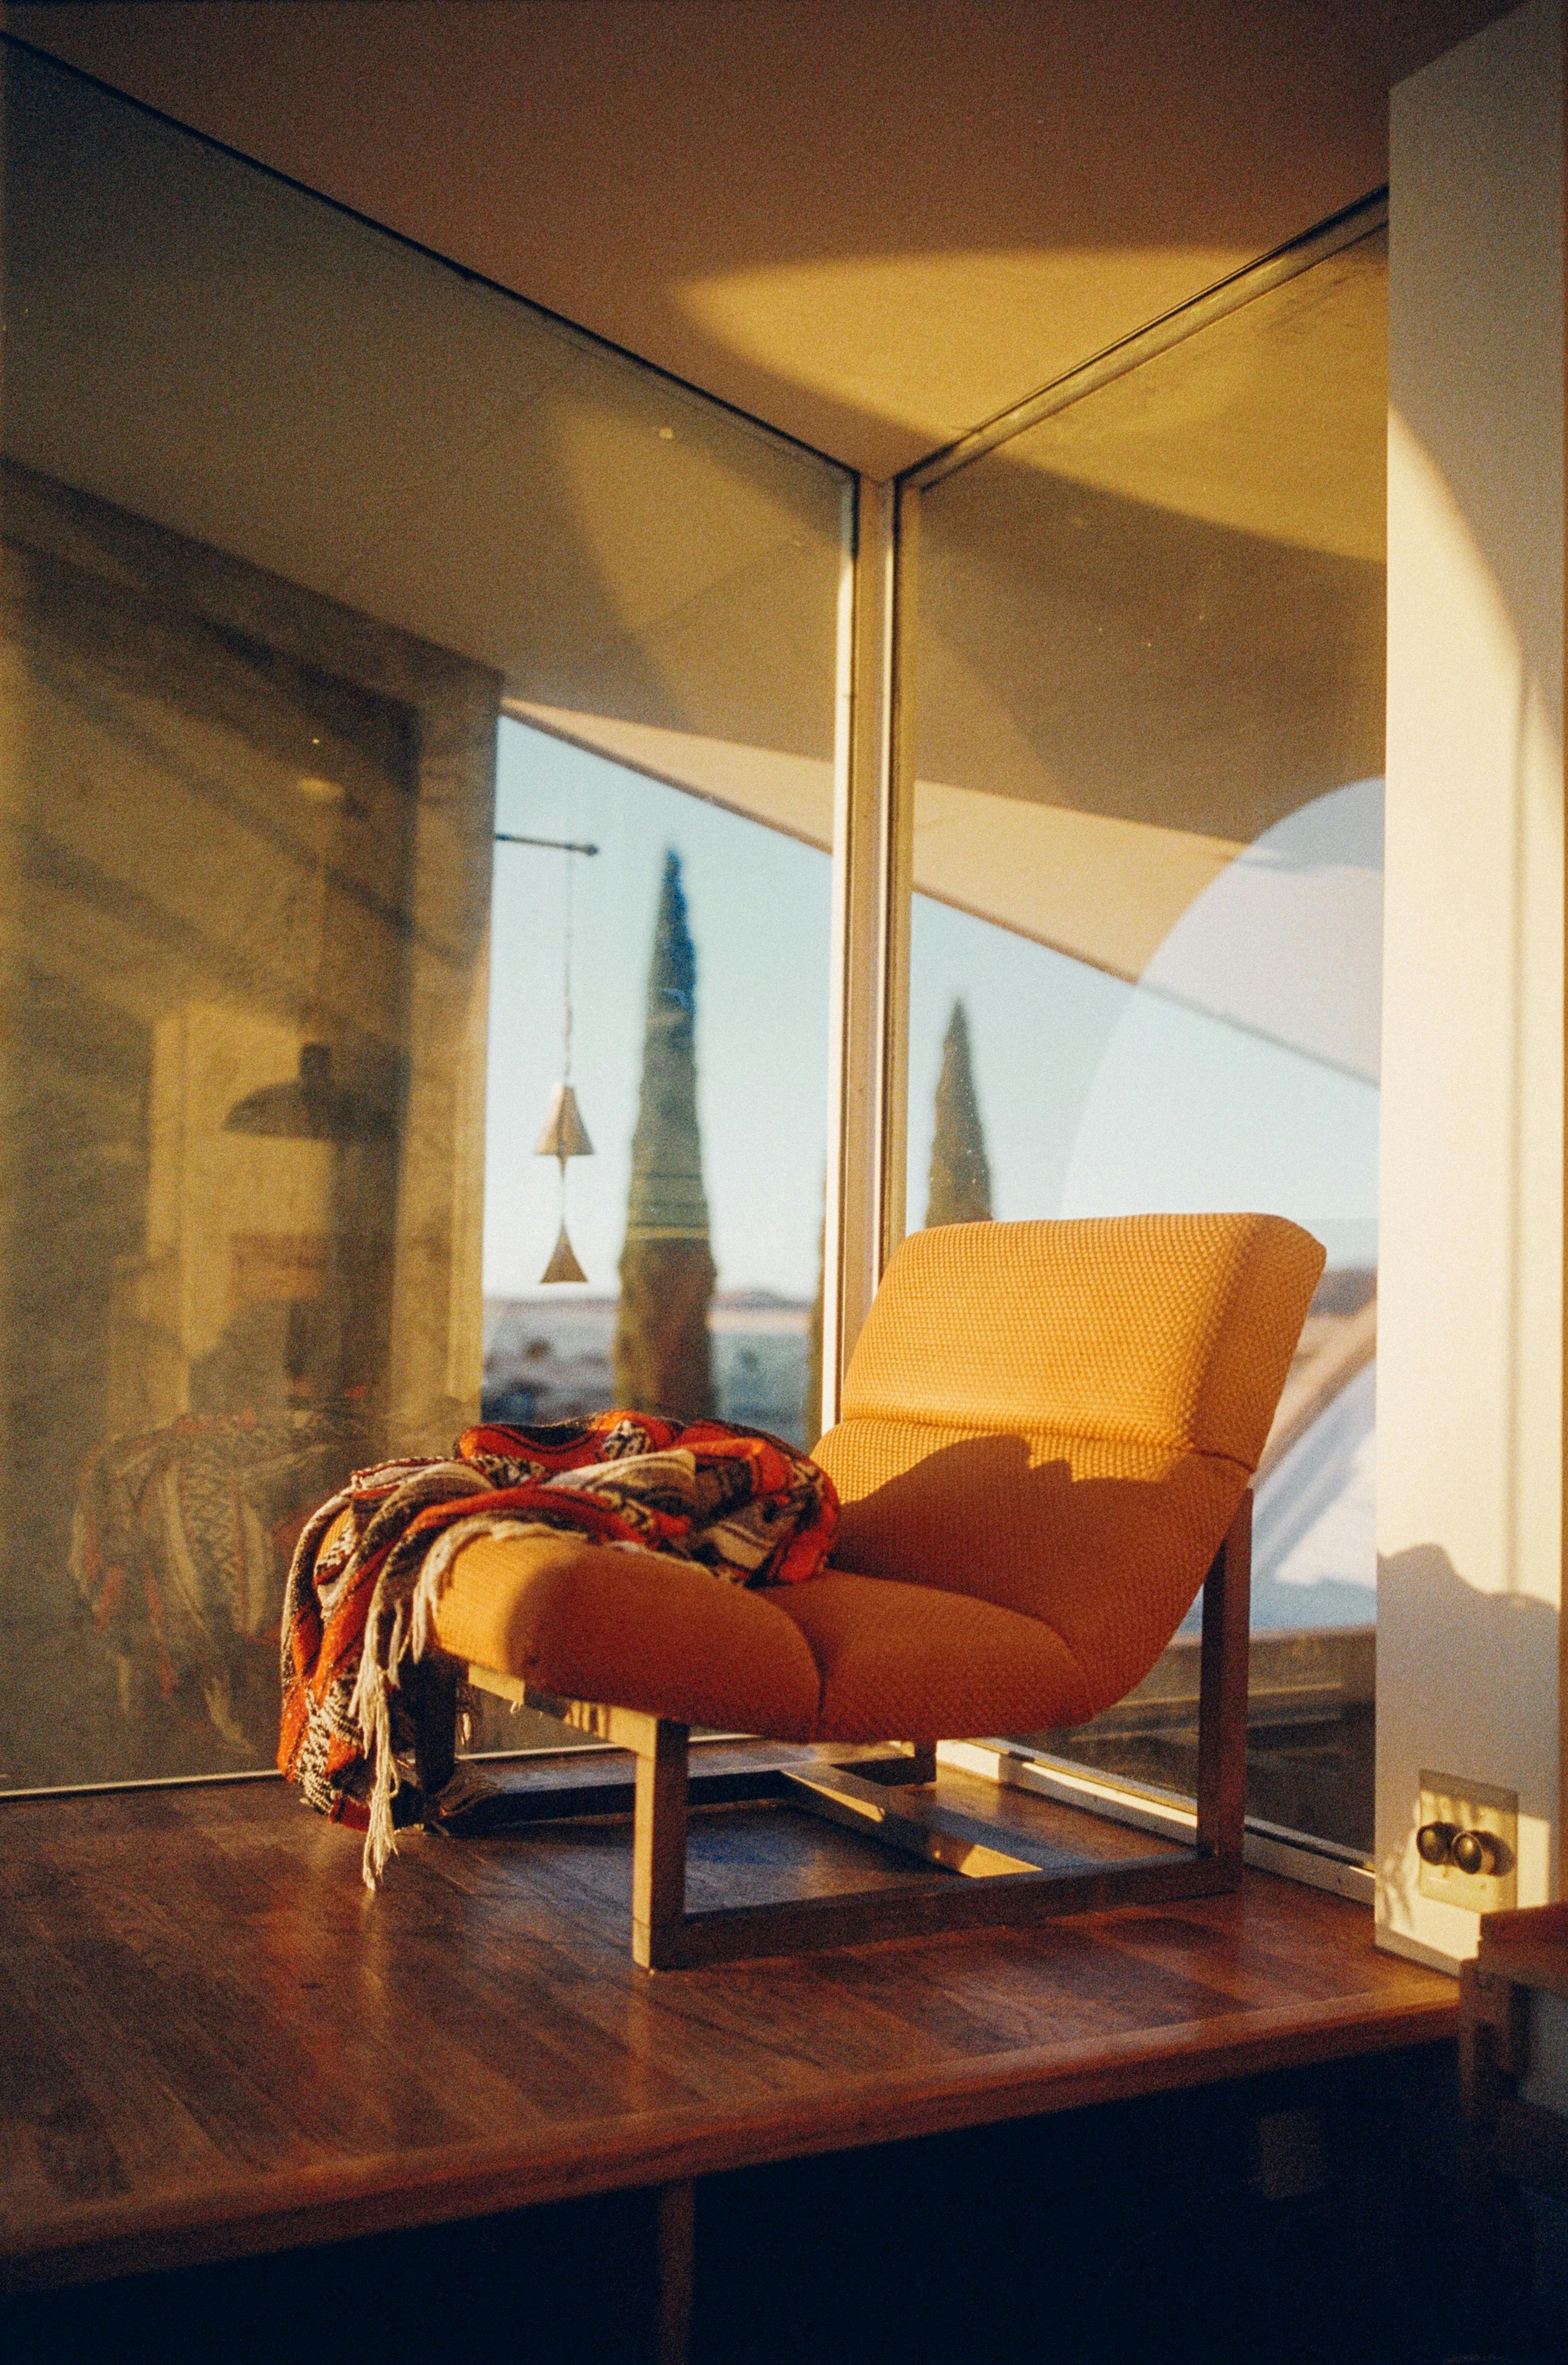 Arcosanti suite captured on film by Natalie Carrasco